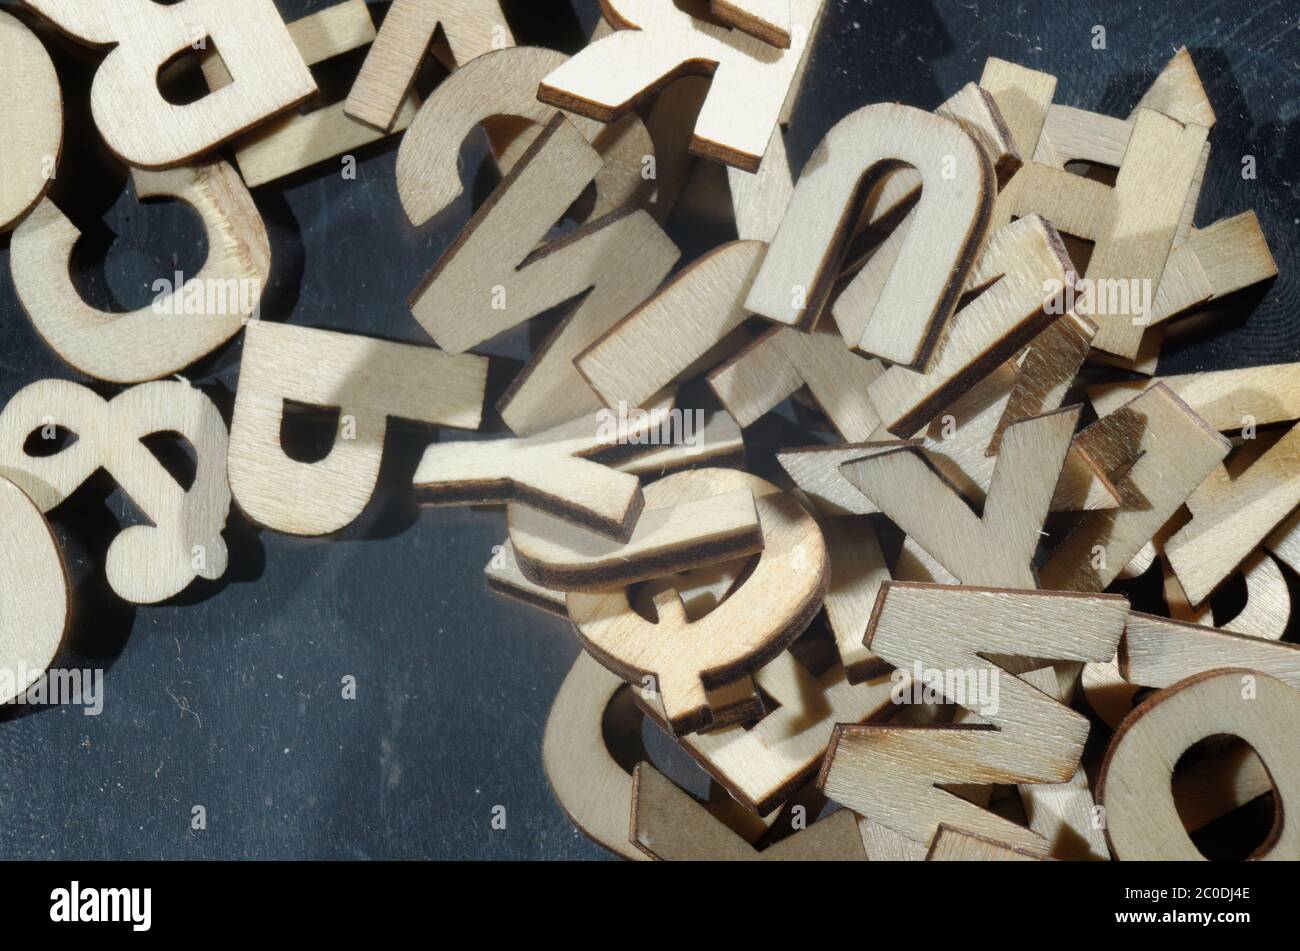 A jumbled pile of wooden letters on a metal surface Stock Photo